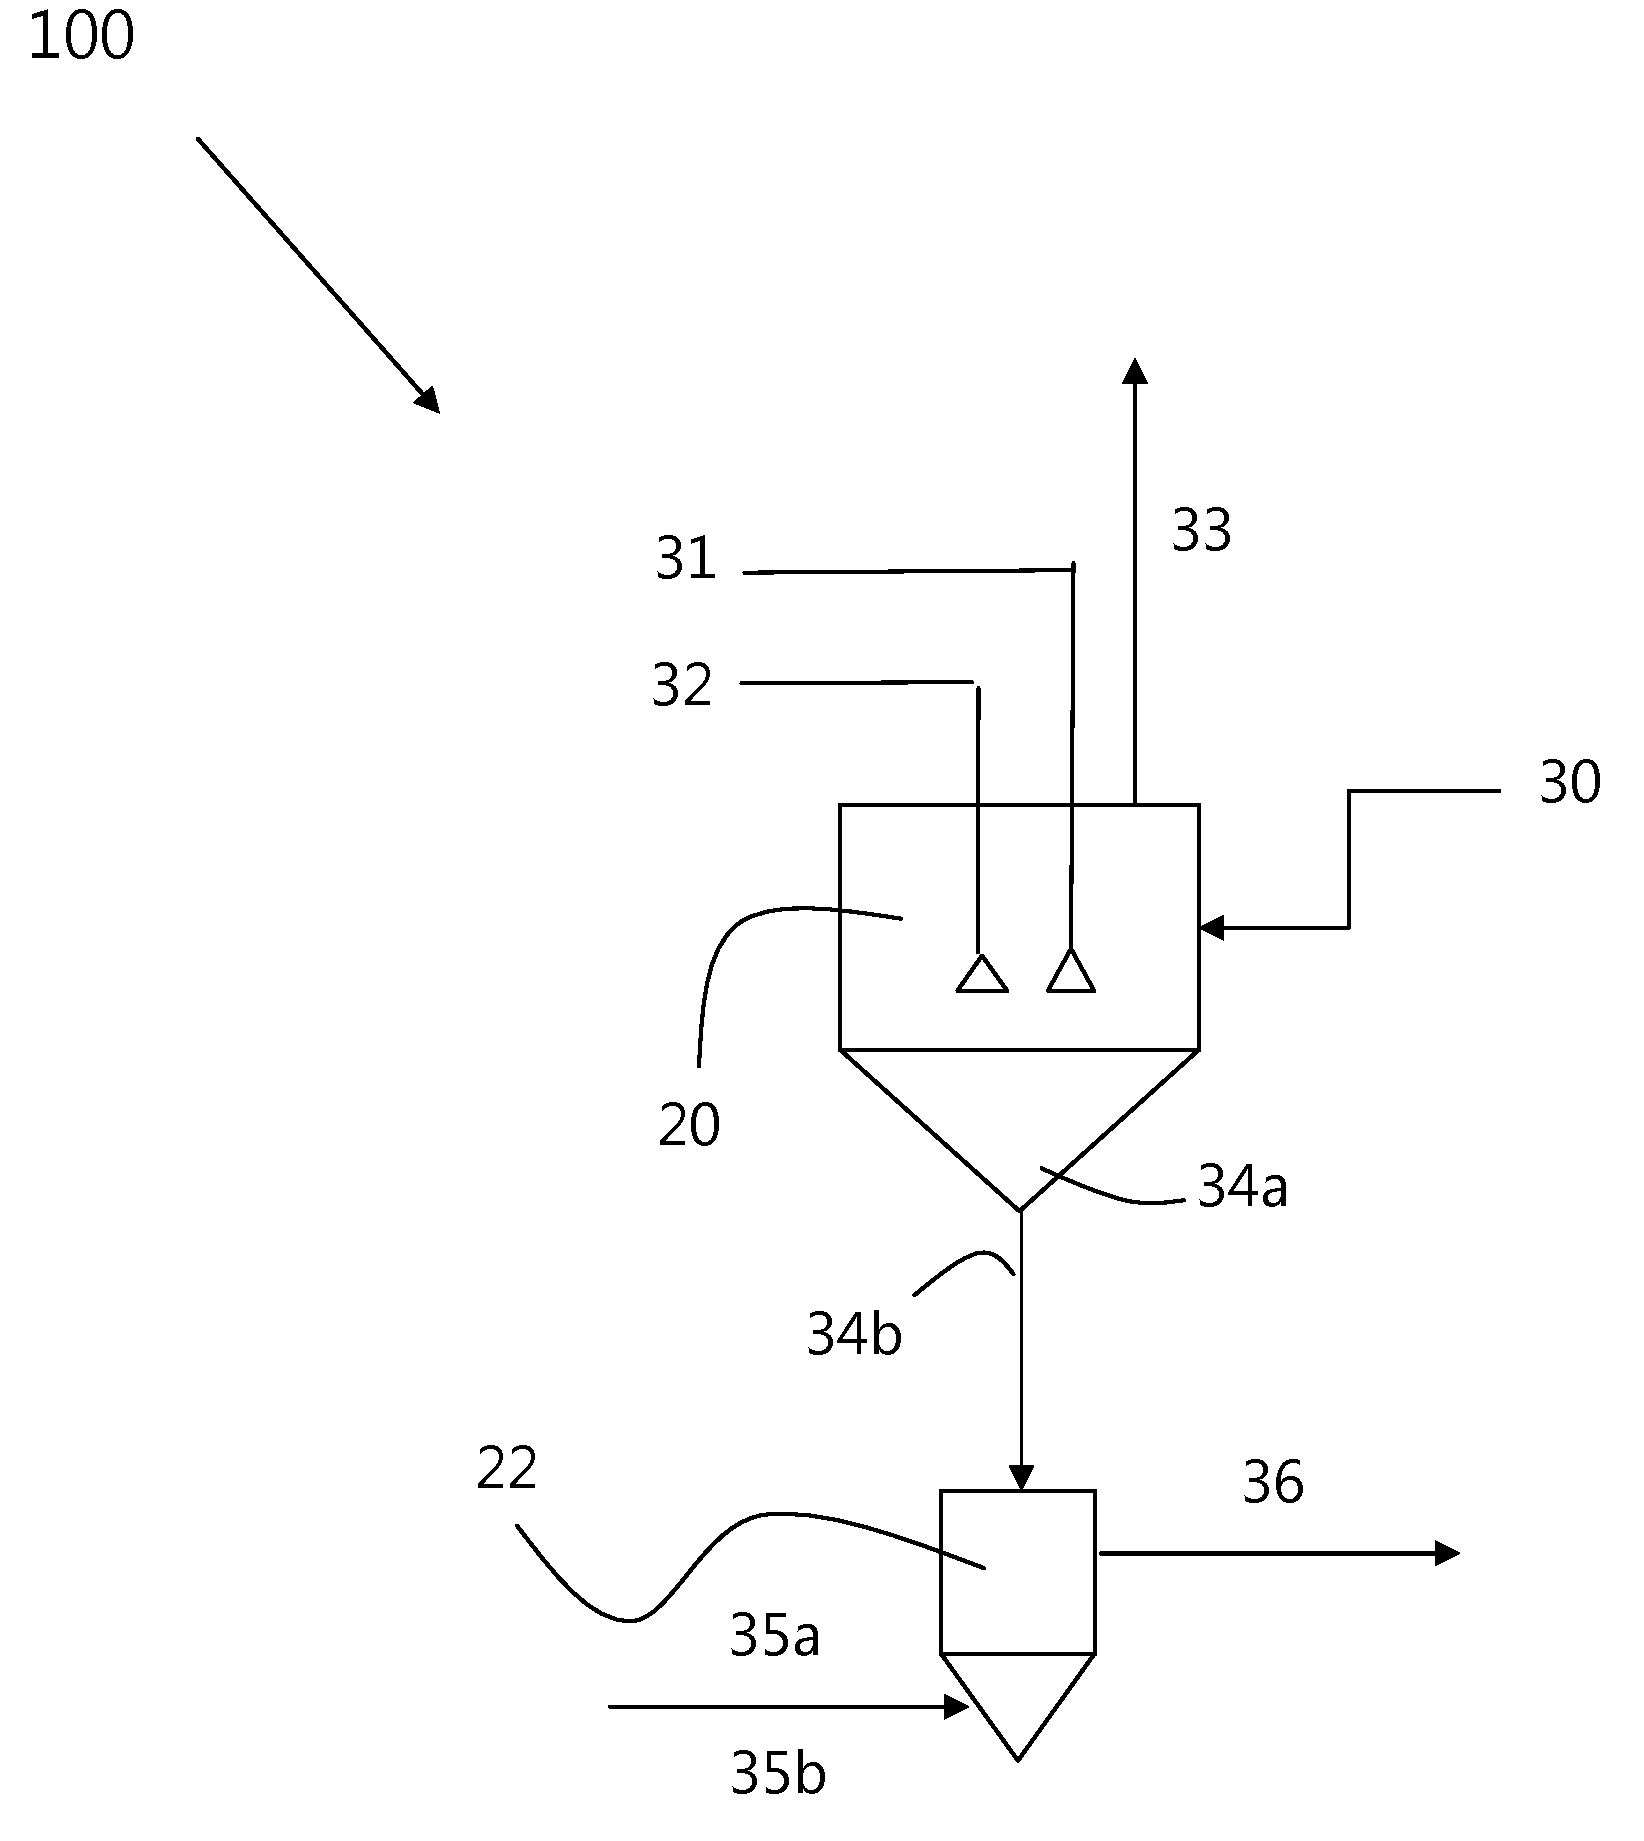 Chemical process to produce hydrogen chloride and chloride-free compound potassium sulfate fertilizers or other metal sulfates